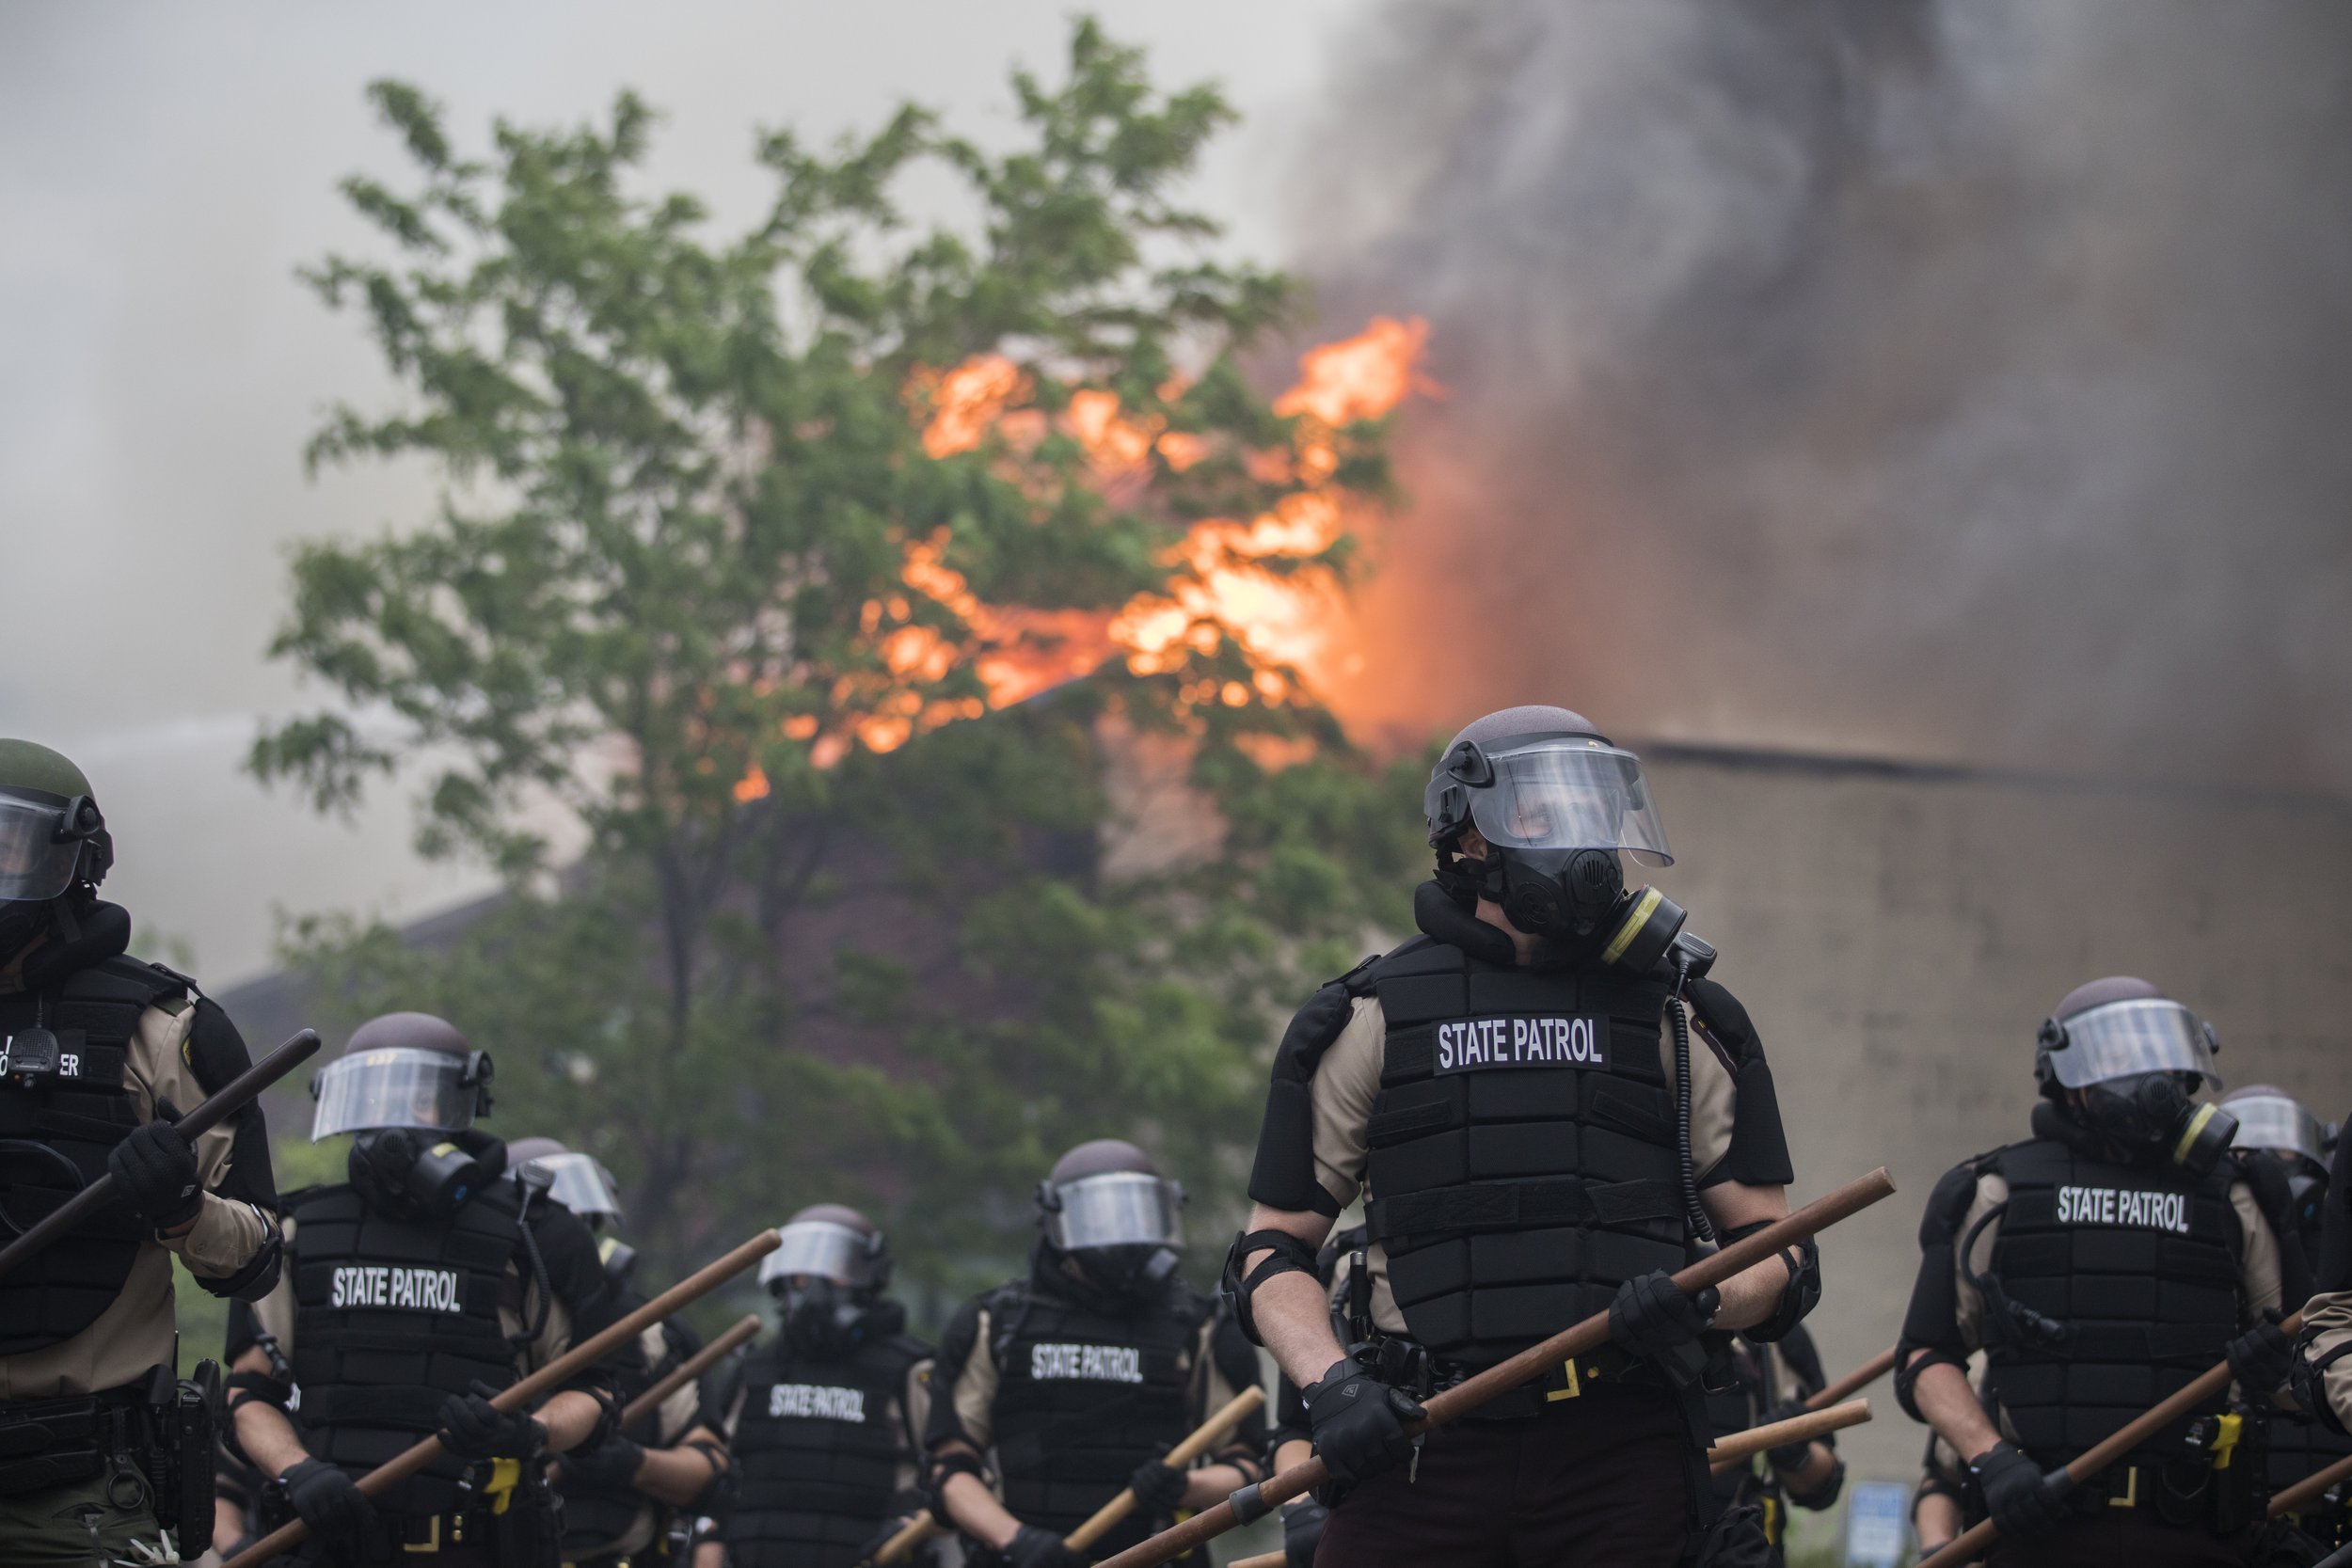  State Patrol officers guard burning buildings on South 27th Avenue, south of East Lake Street in Minneapolis on Friday morning, May 29, 2020. Fires continued to burn after protests over the death of George Floyd broke out for a third straight night.